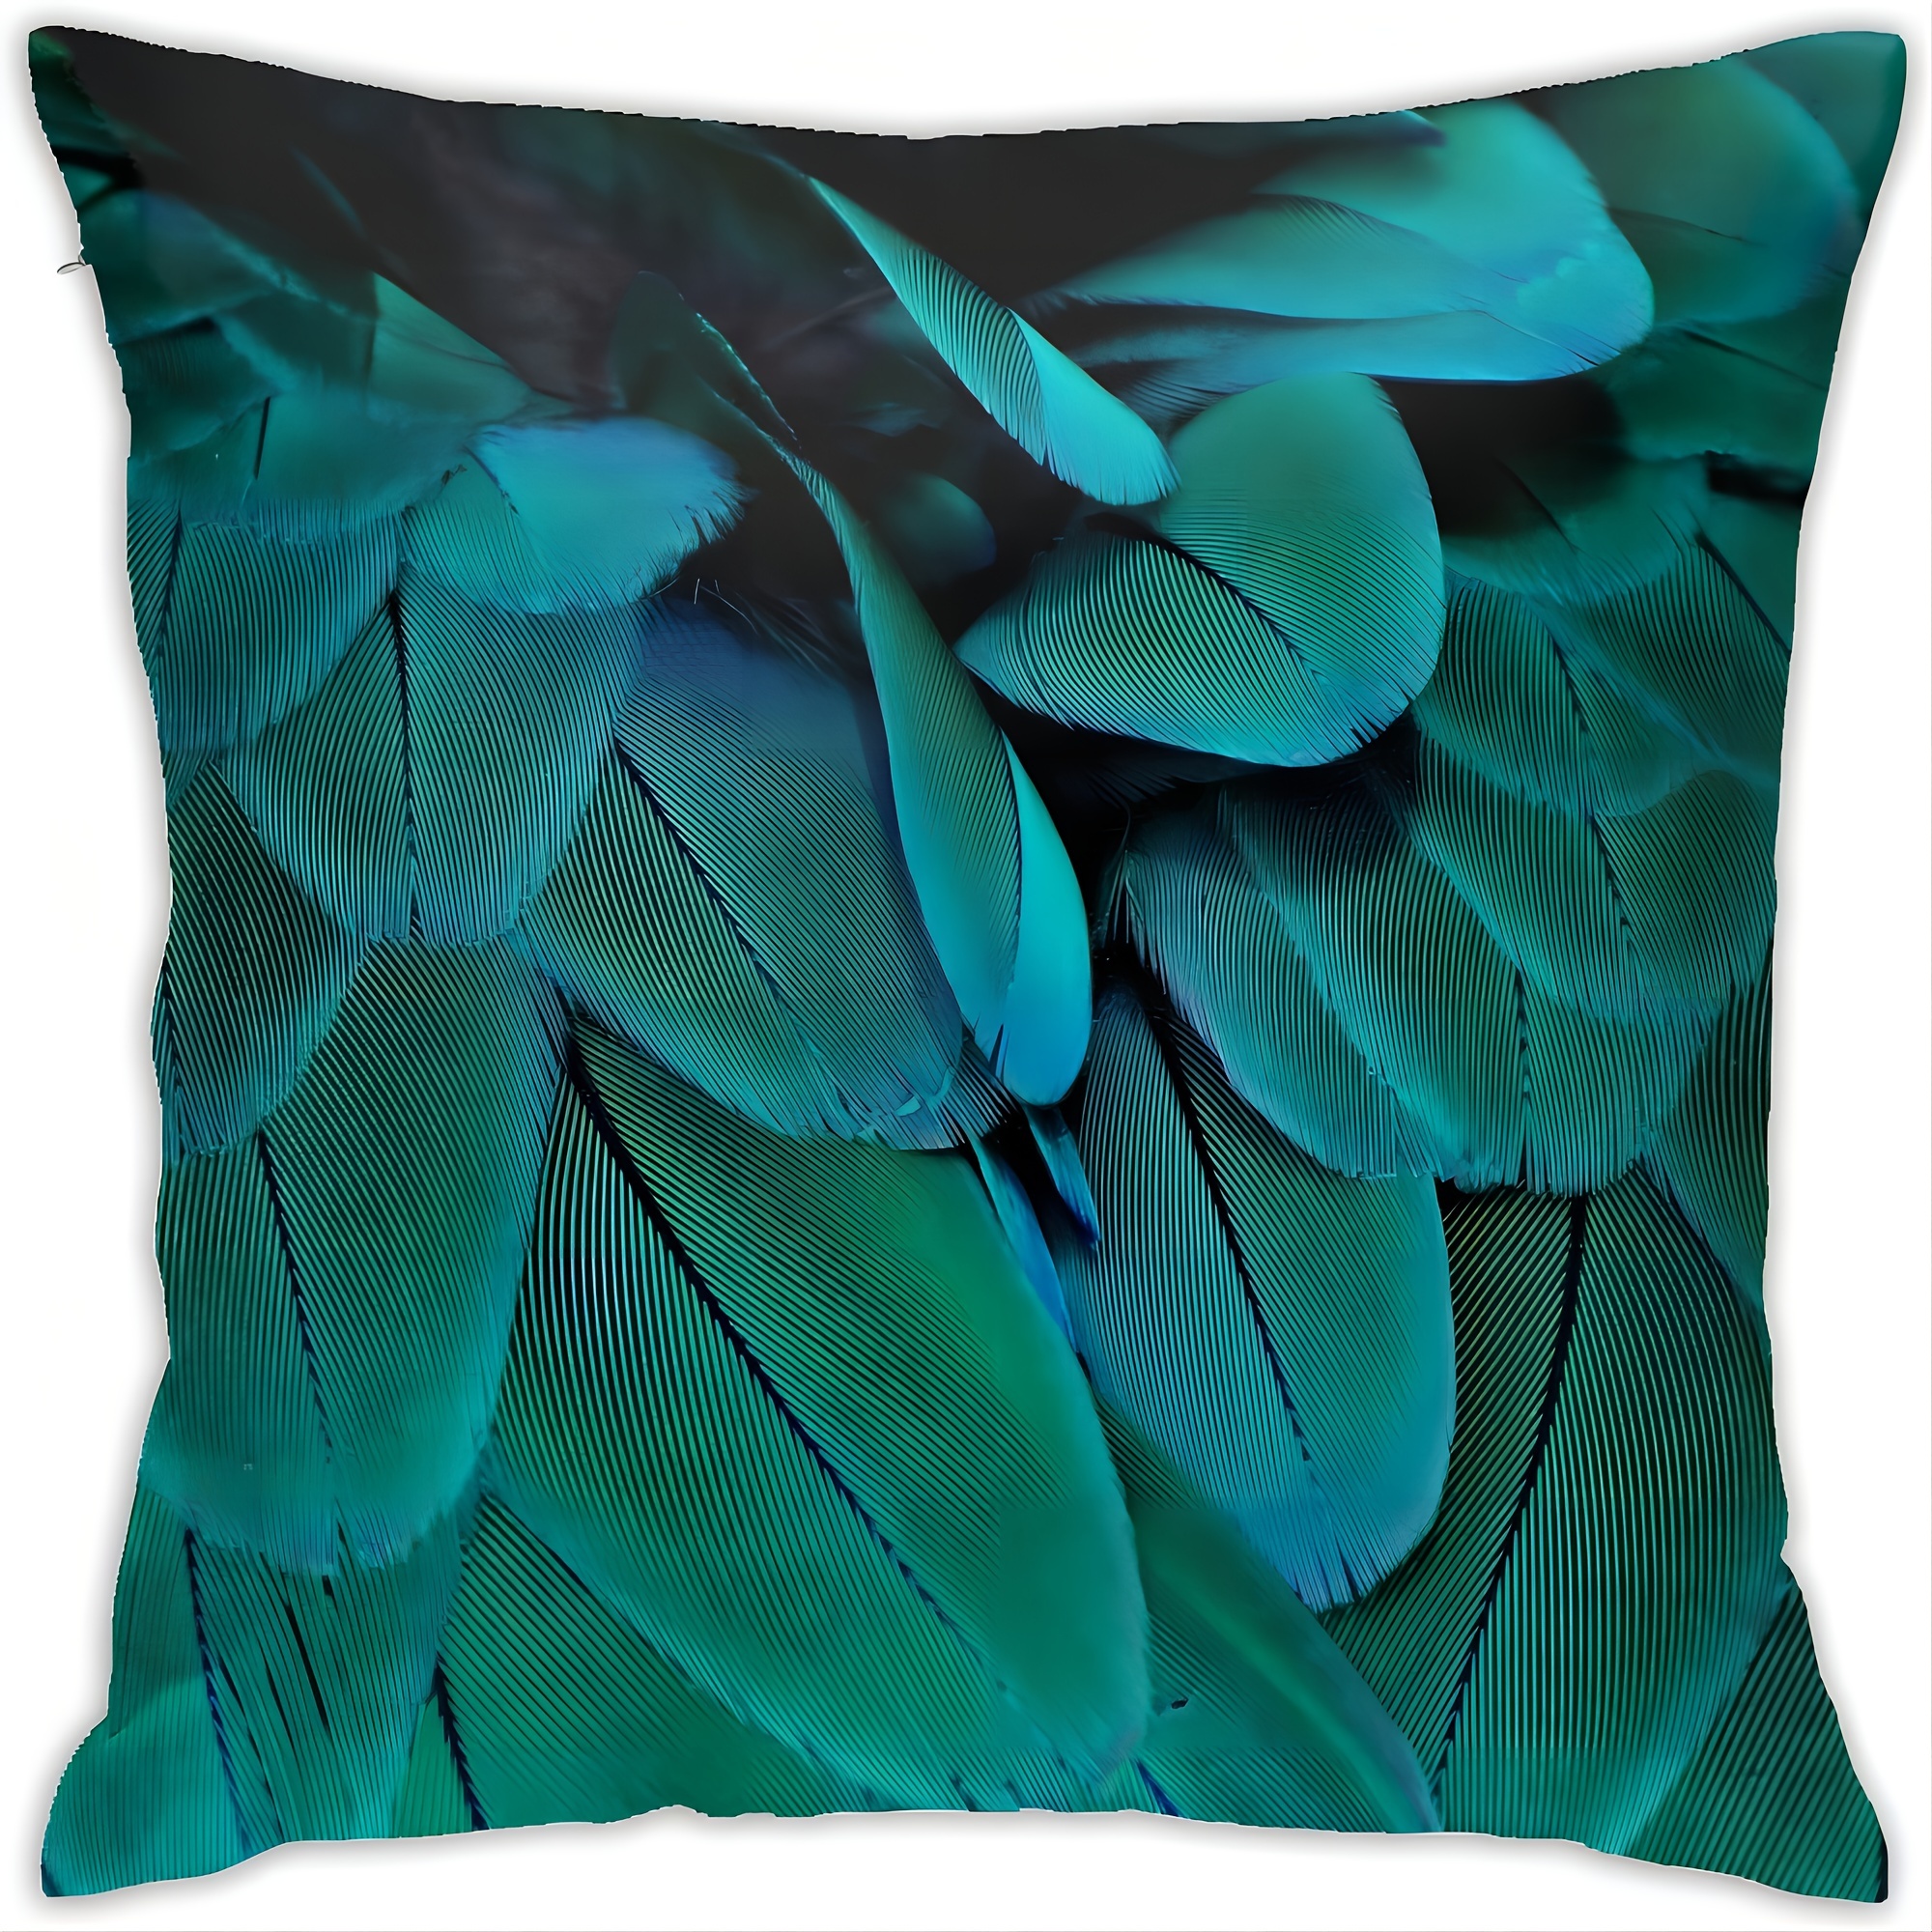 

1pc Feather Glitter Teal And Gold Print Pillow Covers Decorative Throw Pillowcase Couch Cushion Cover For Home Decor Sofa Living Room Bed Car Sofa Short Plush Decor (no Pillow Core)